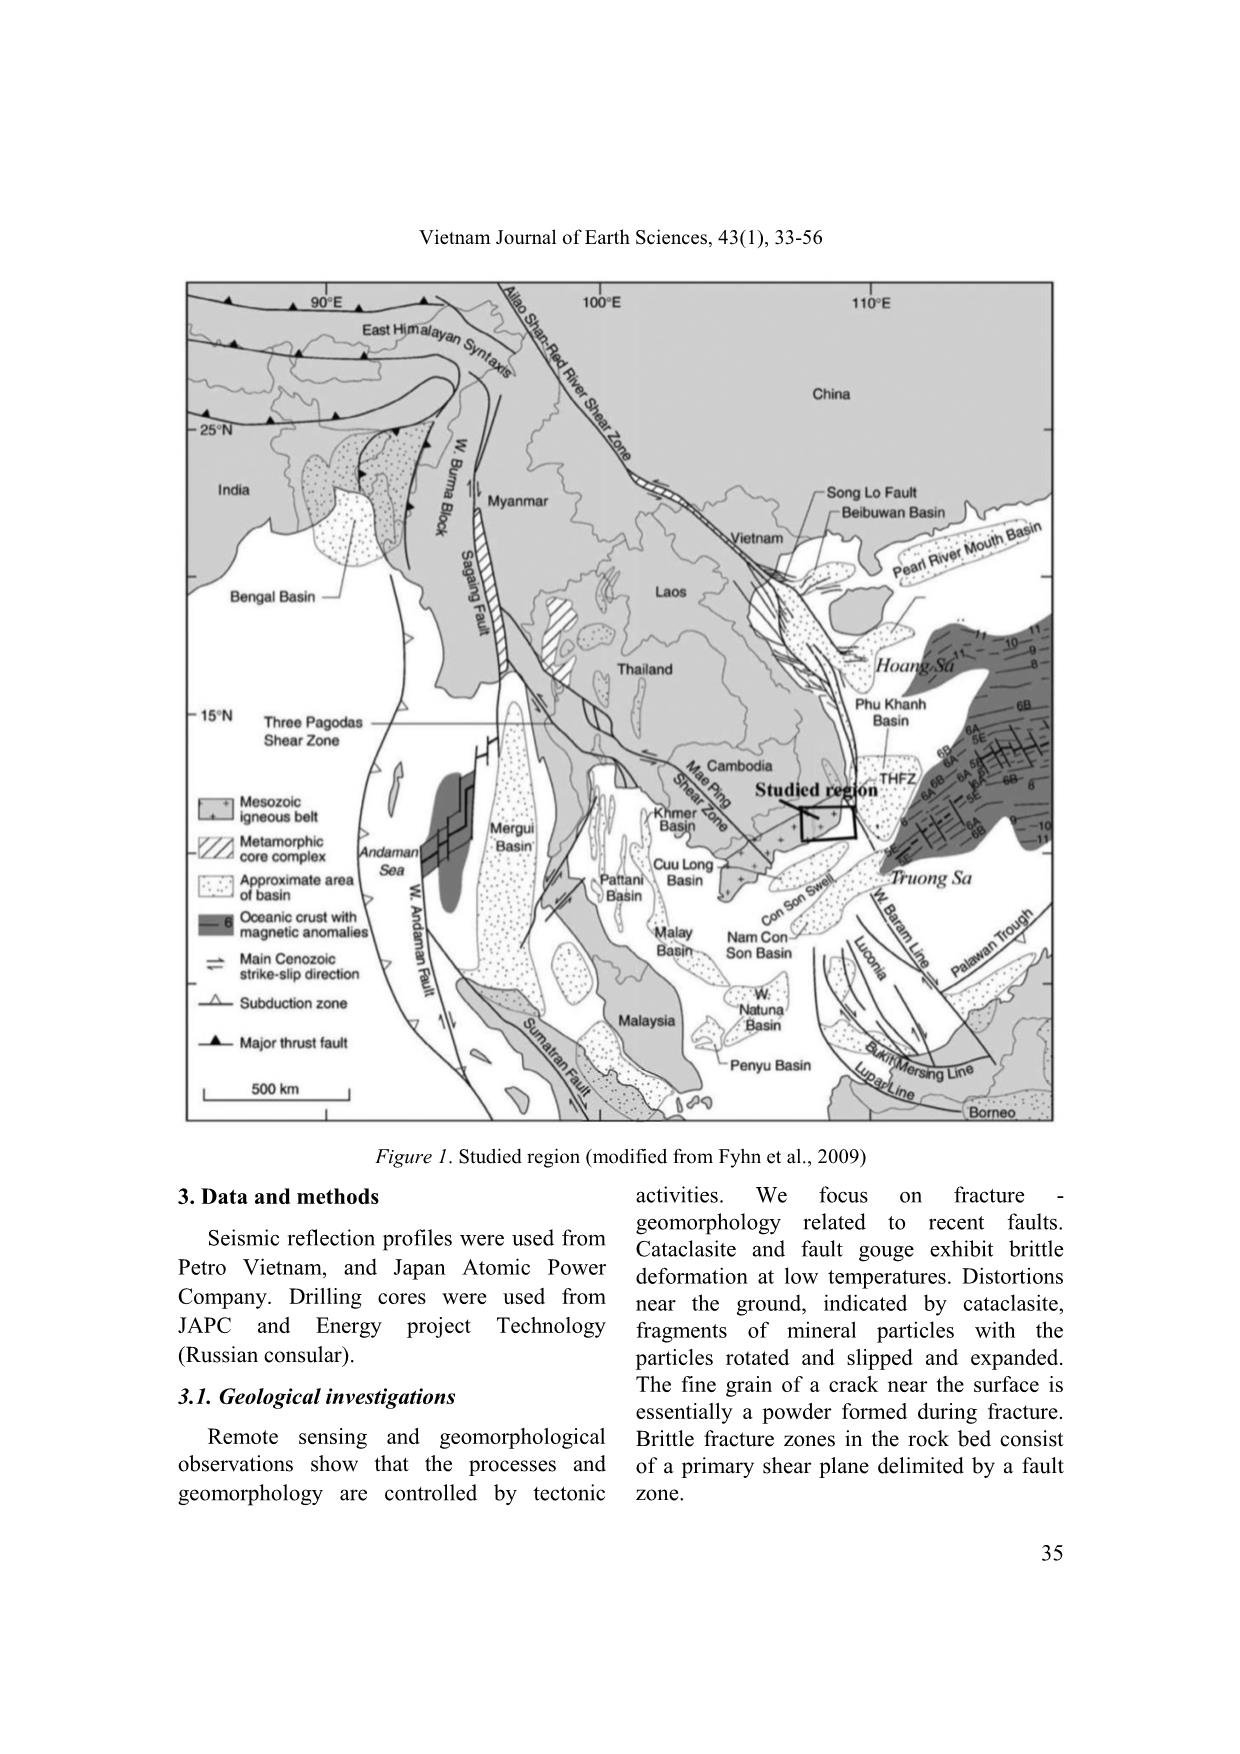 Pliocene - Present tectonics and strain rate in Ninh Thuan region and surrounding continental shelf trang 3